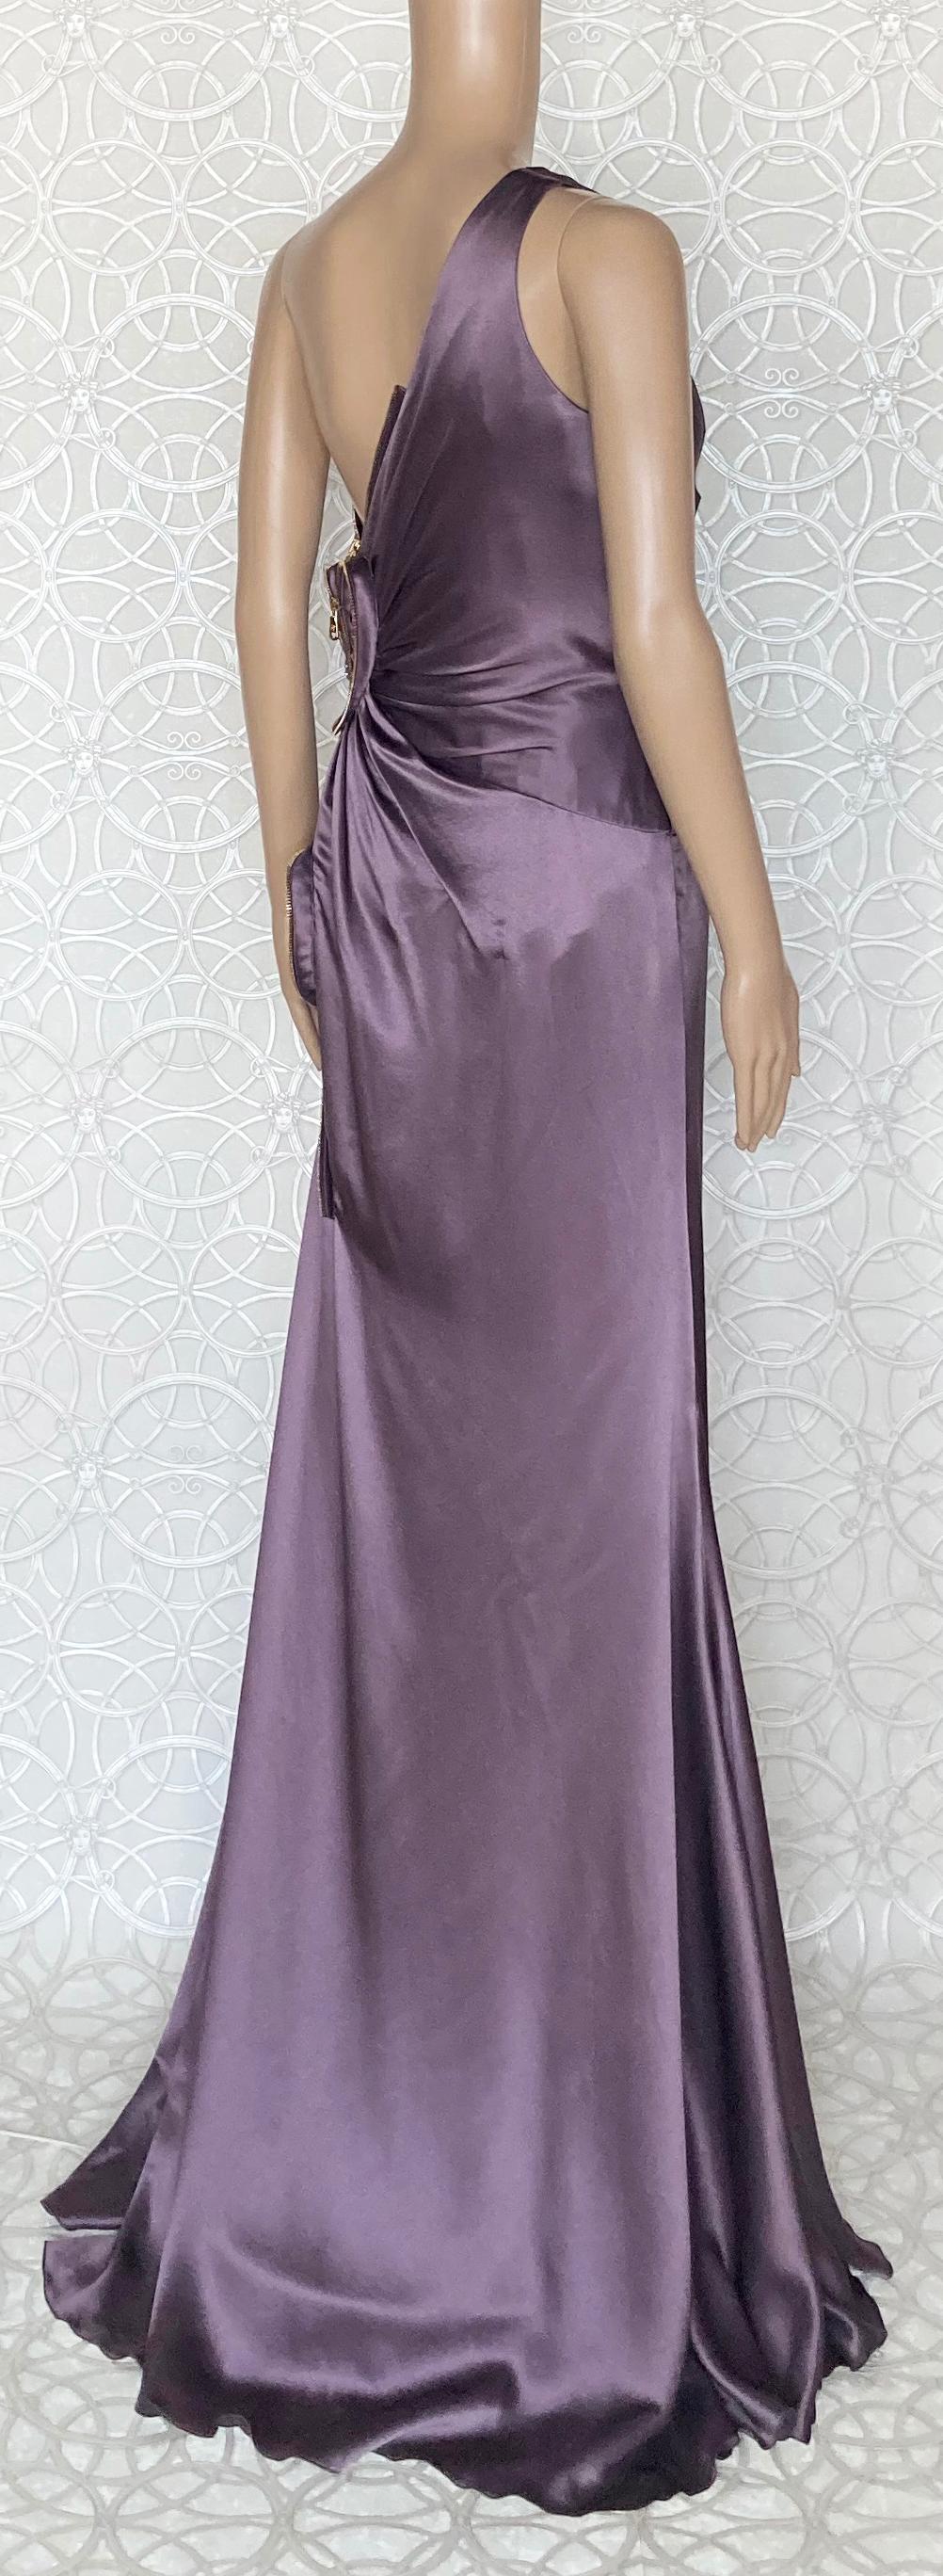 S/S 2009 L# 37 VERSACE ONE SHOULDER PURPLE LONG DRESS GOWN With HEARTS 46 - 10 For Sale 2